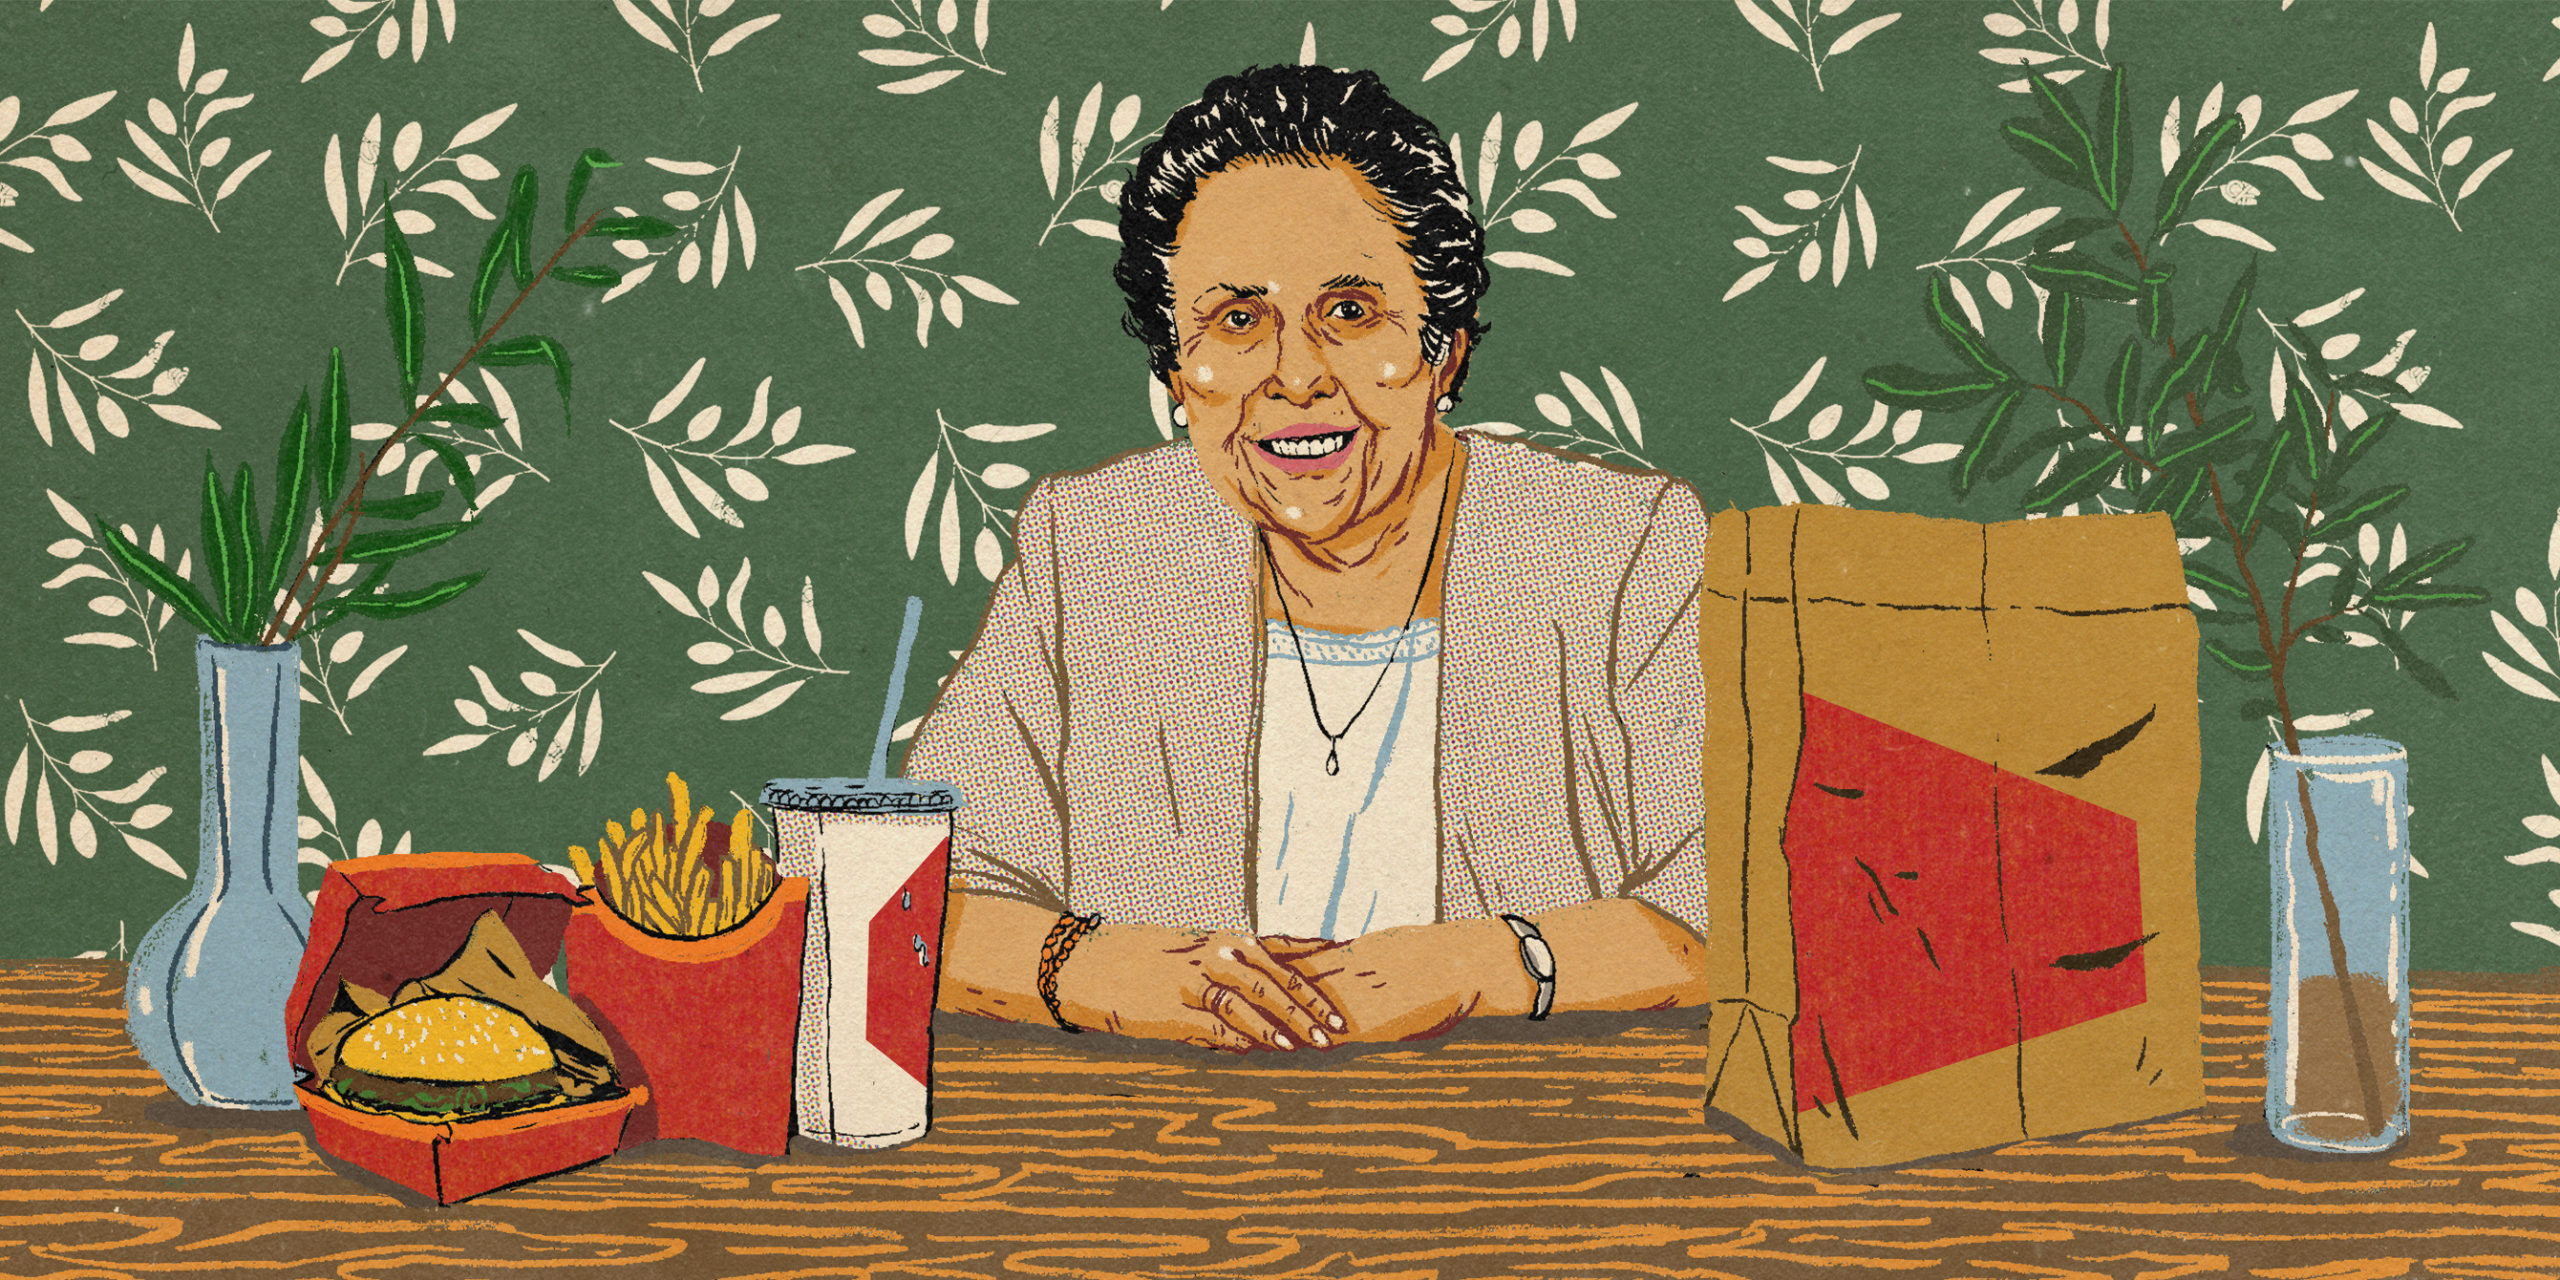 An illustration of Aban Pestonjee sitting at a table with a fast food meal.